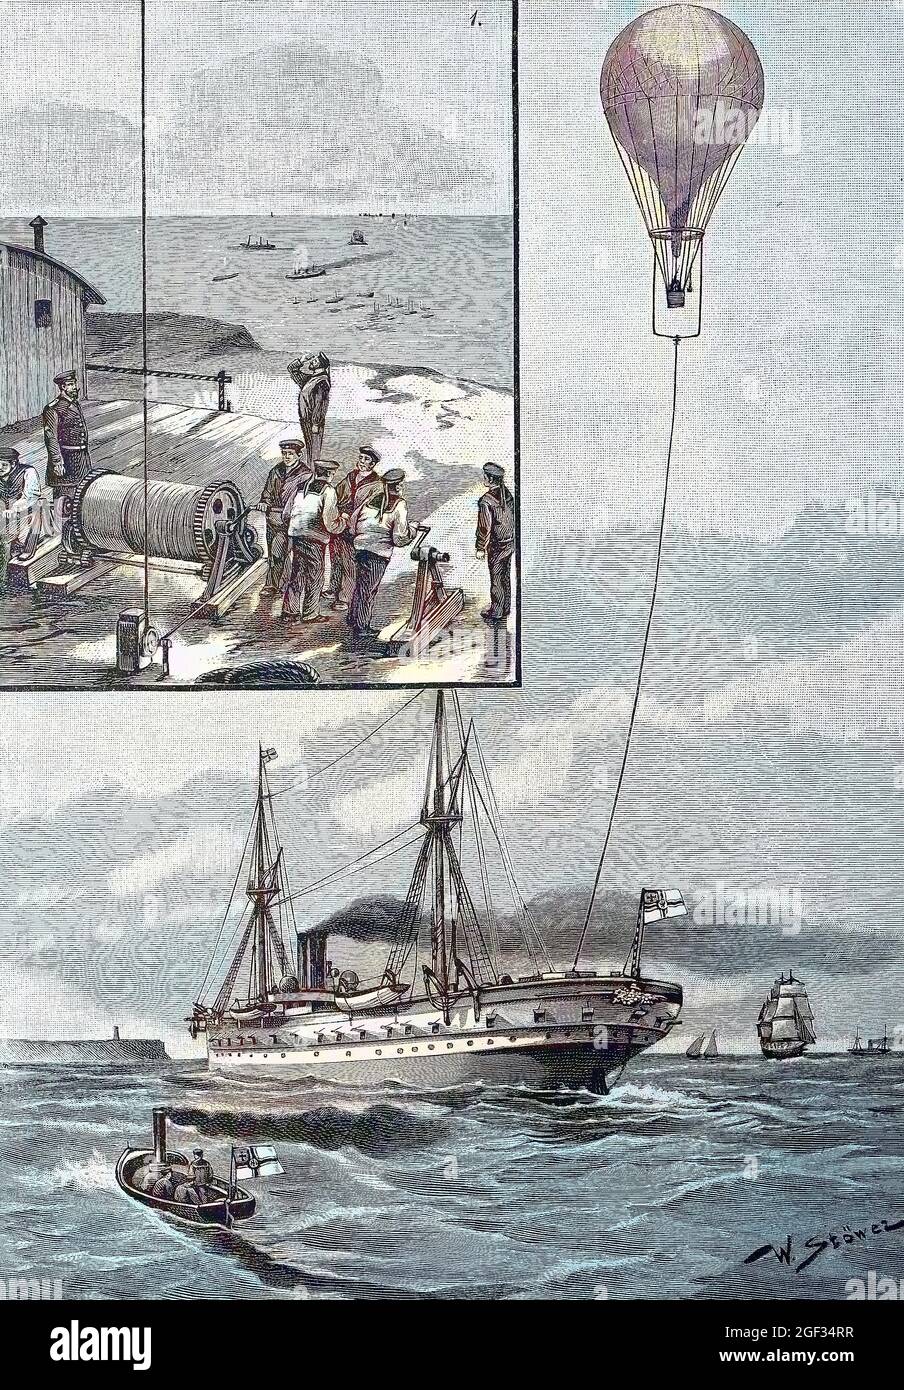 trials with the tethered, moored or captive balloon on the sea at helgoland, Germany, Versuche mit dem Fesselballon auf dem Meere bei Helgoland, digital improved reproduction of an original print from the year 1881, Koloriert, Kolorierung, koloriert, handkoloriert, Hand-colouring, hand coloured, colored, Stock Photo